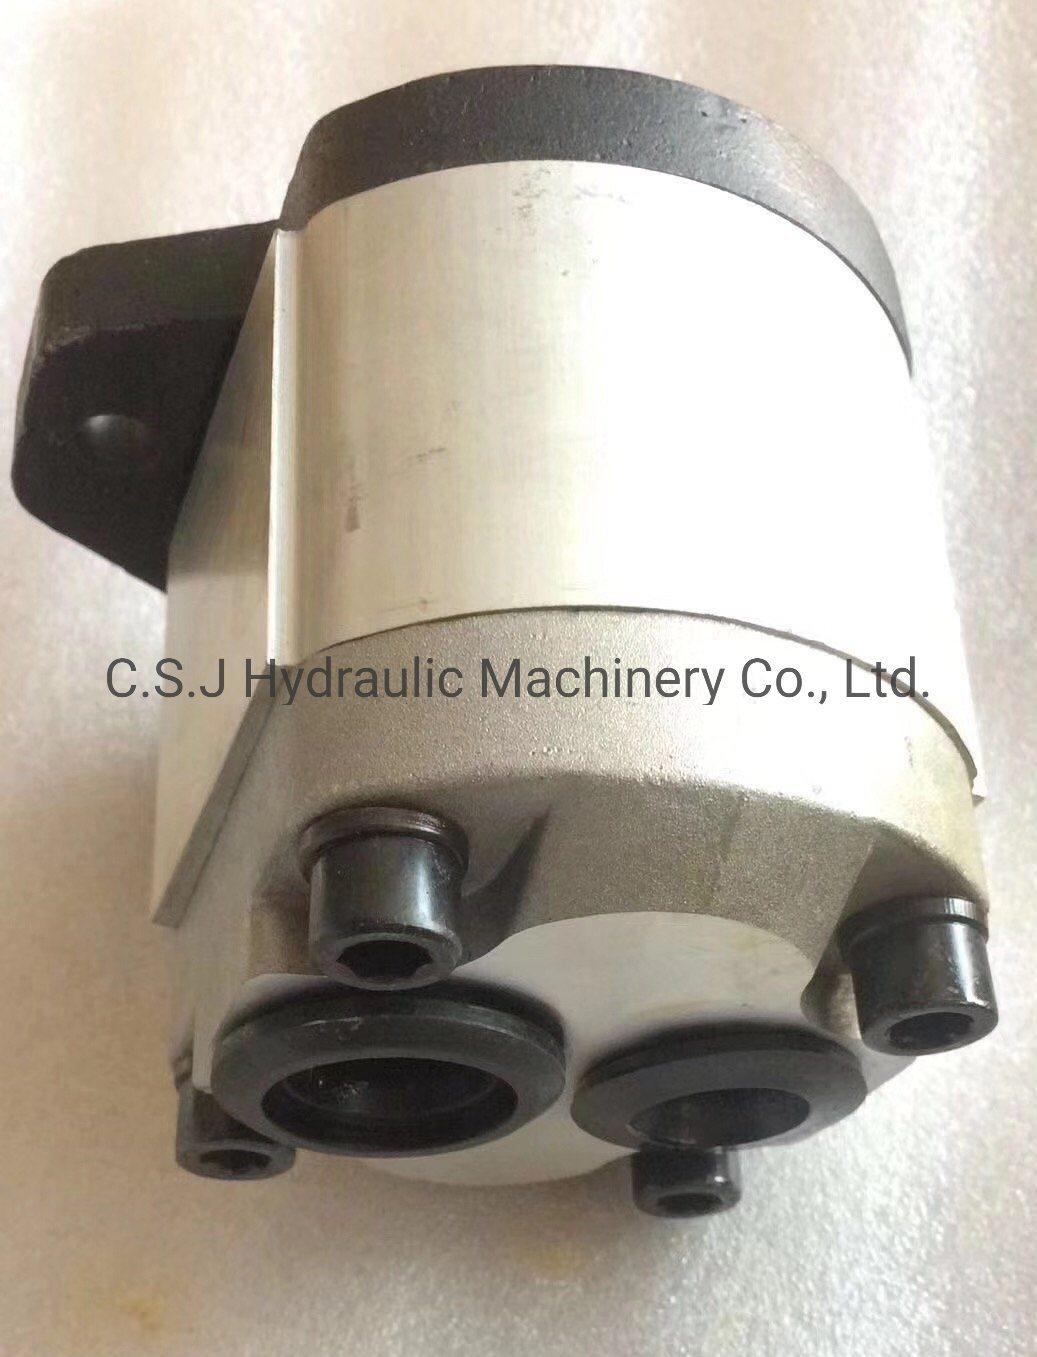 Clg220 Gear Pump for Liugong Excavator